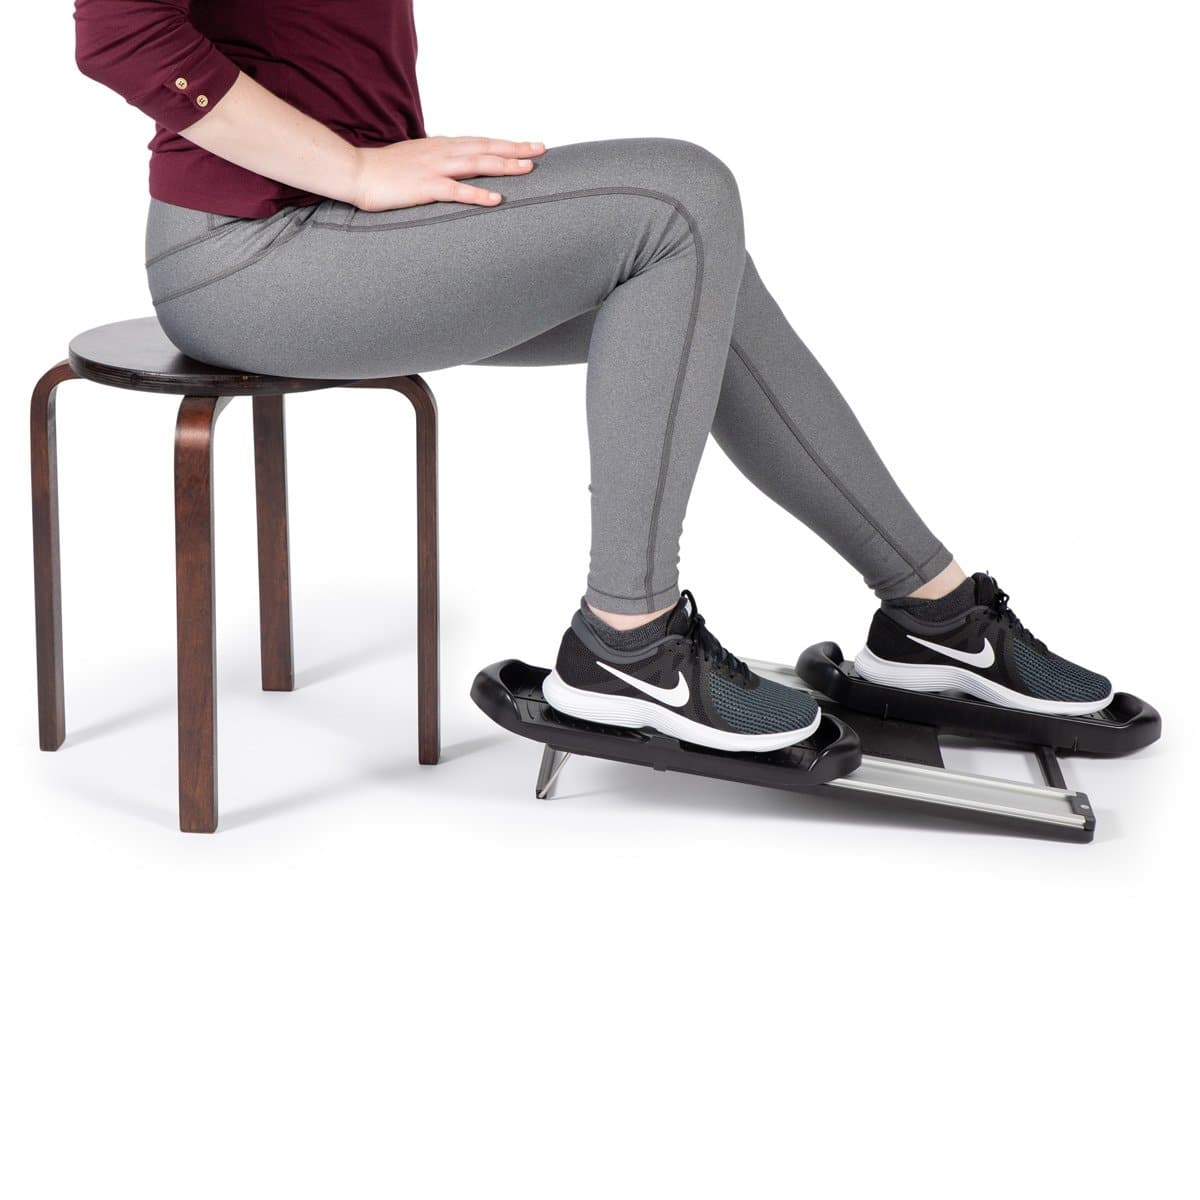 FitGLIDE® Low Impact Exercise and Rehab Tool For Lower Extremities - Senior.com Rehab Equipment